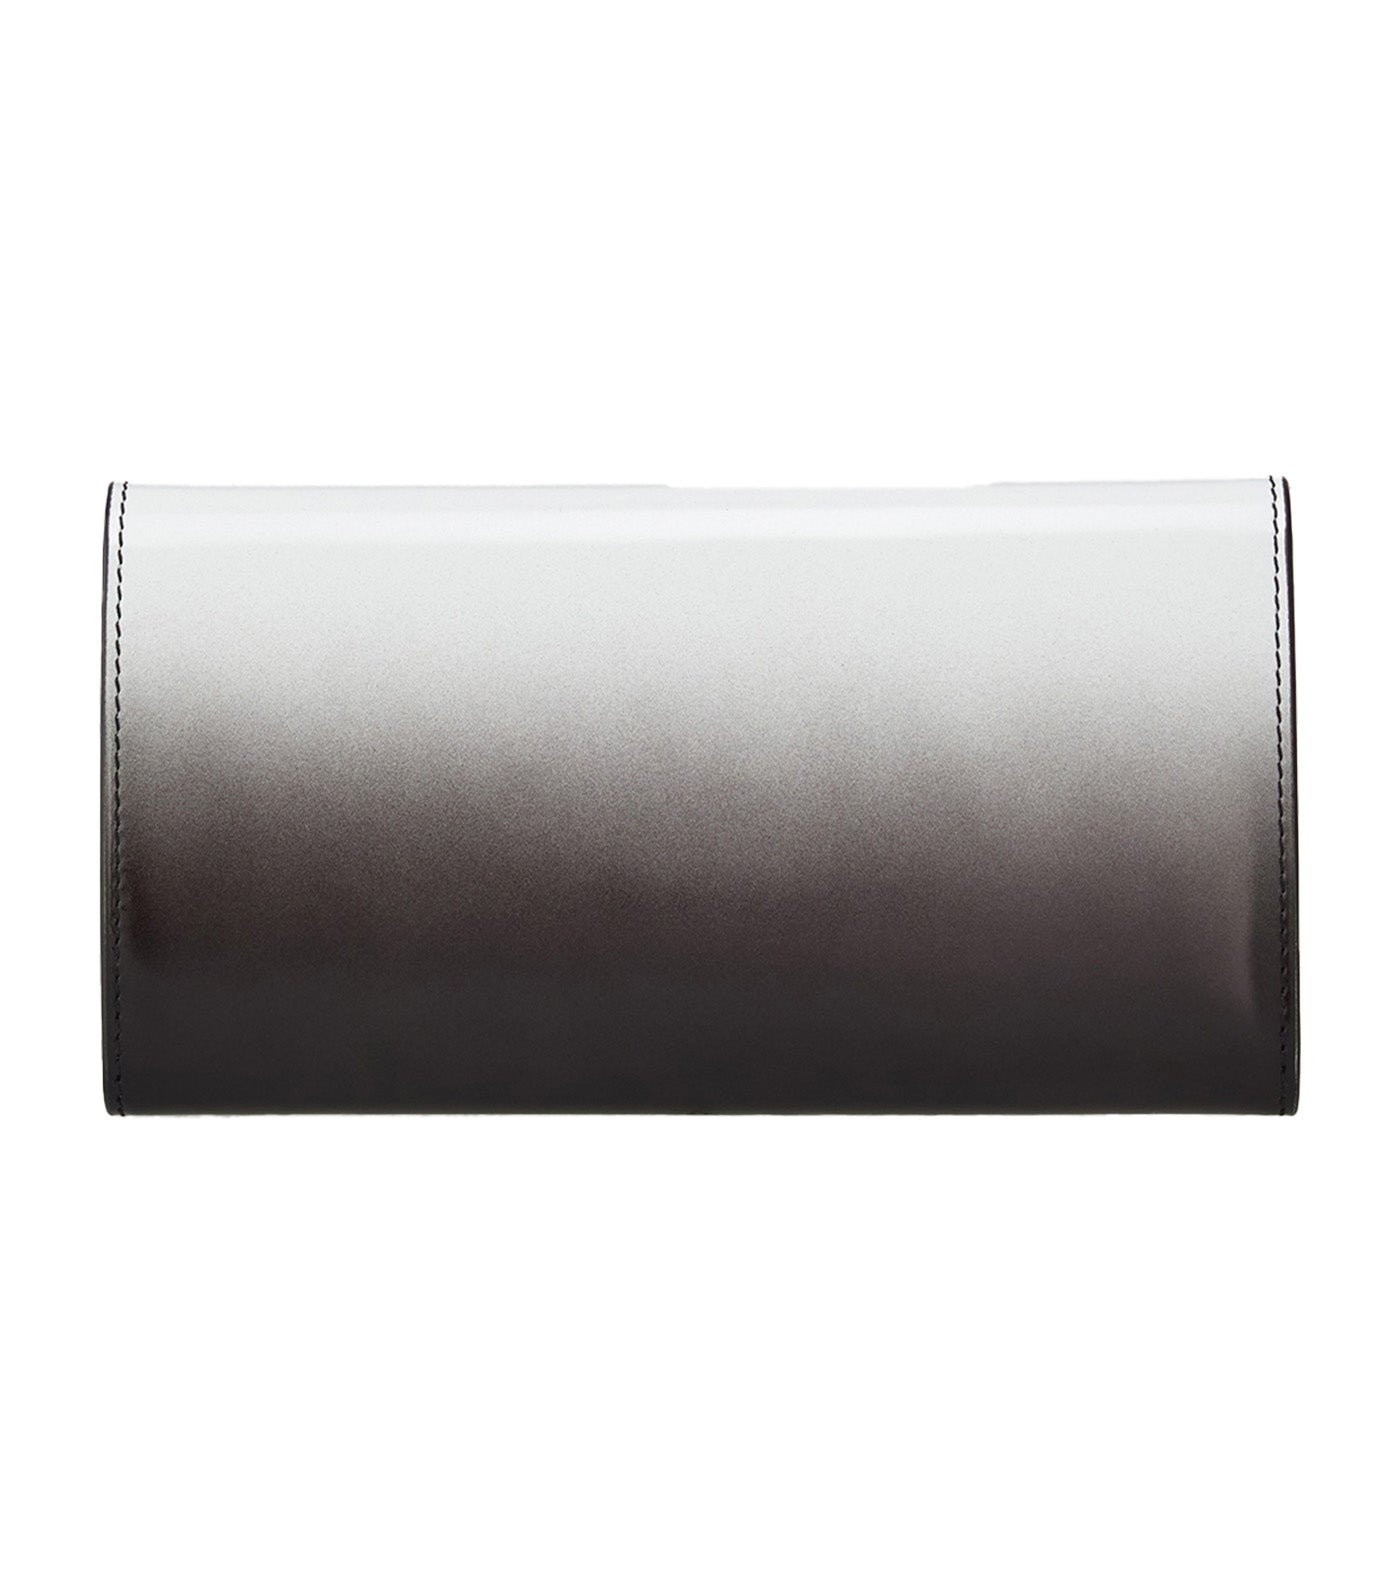 Continental Wallet with Gancini Clasp Optic White/Black